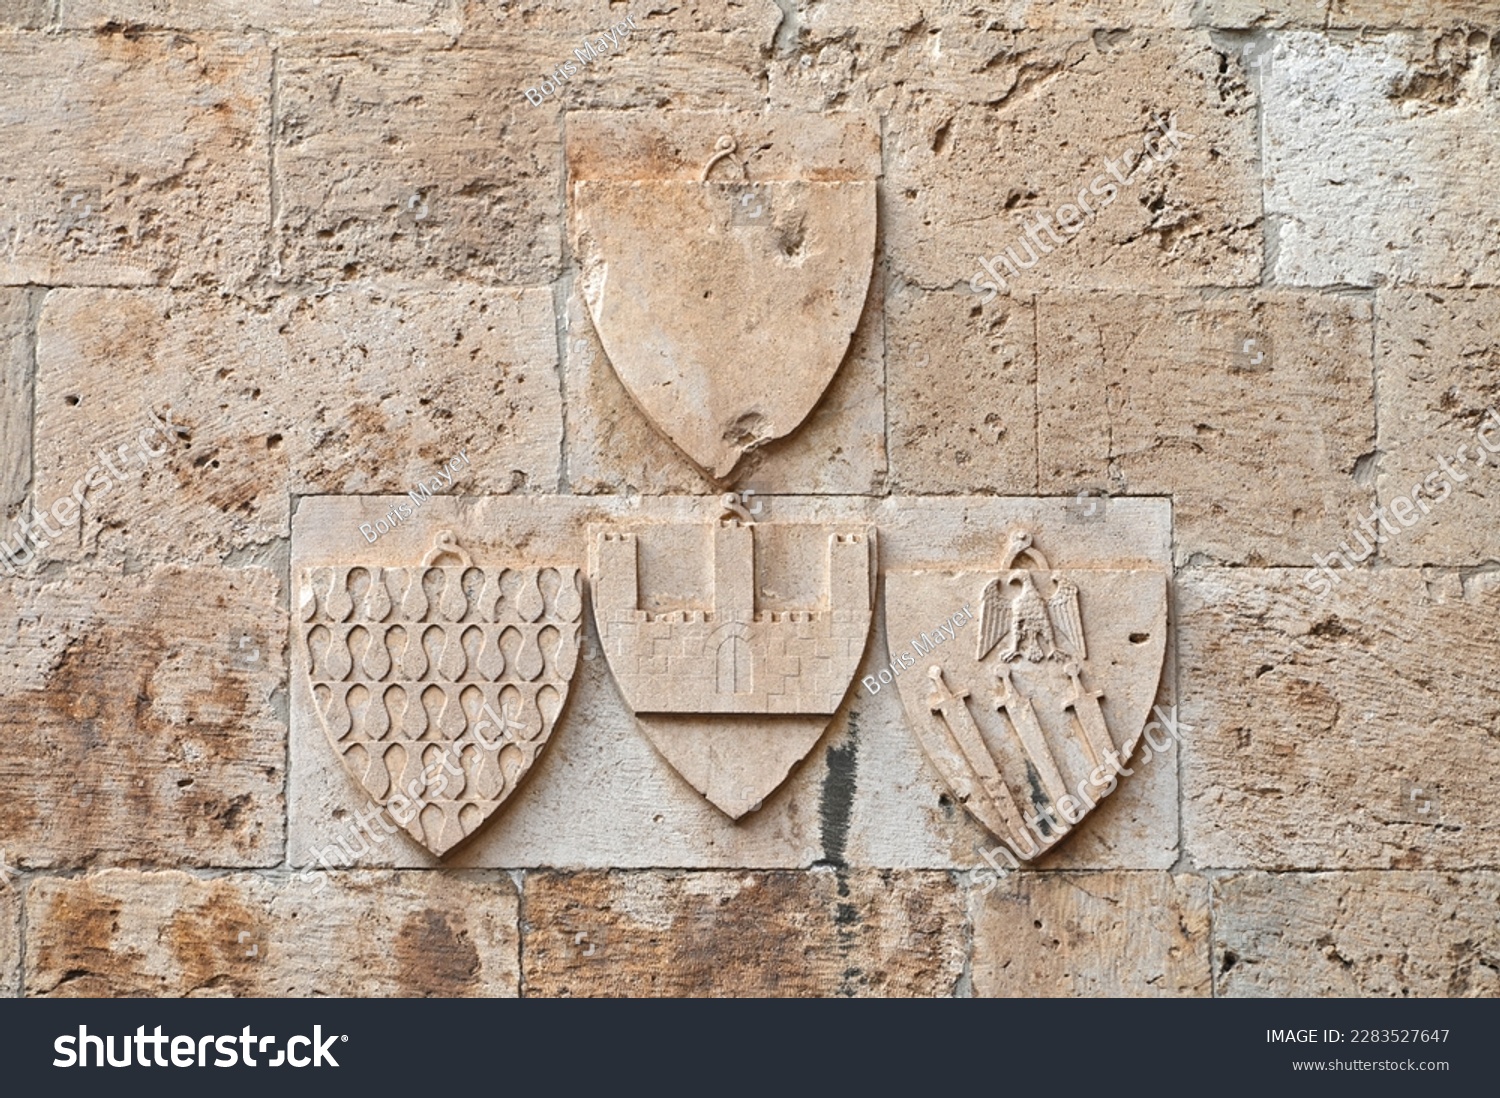 Heraldic symbols, coat of arms, at the Elephant Tower, in the historic city center of Cagliari, Sardinia, Italy #2283527647